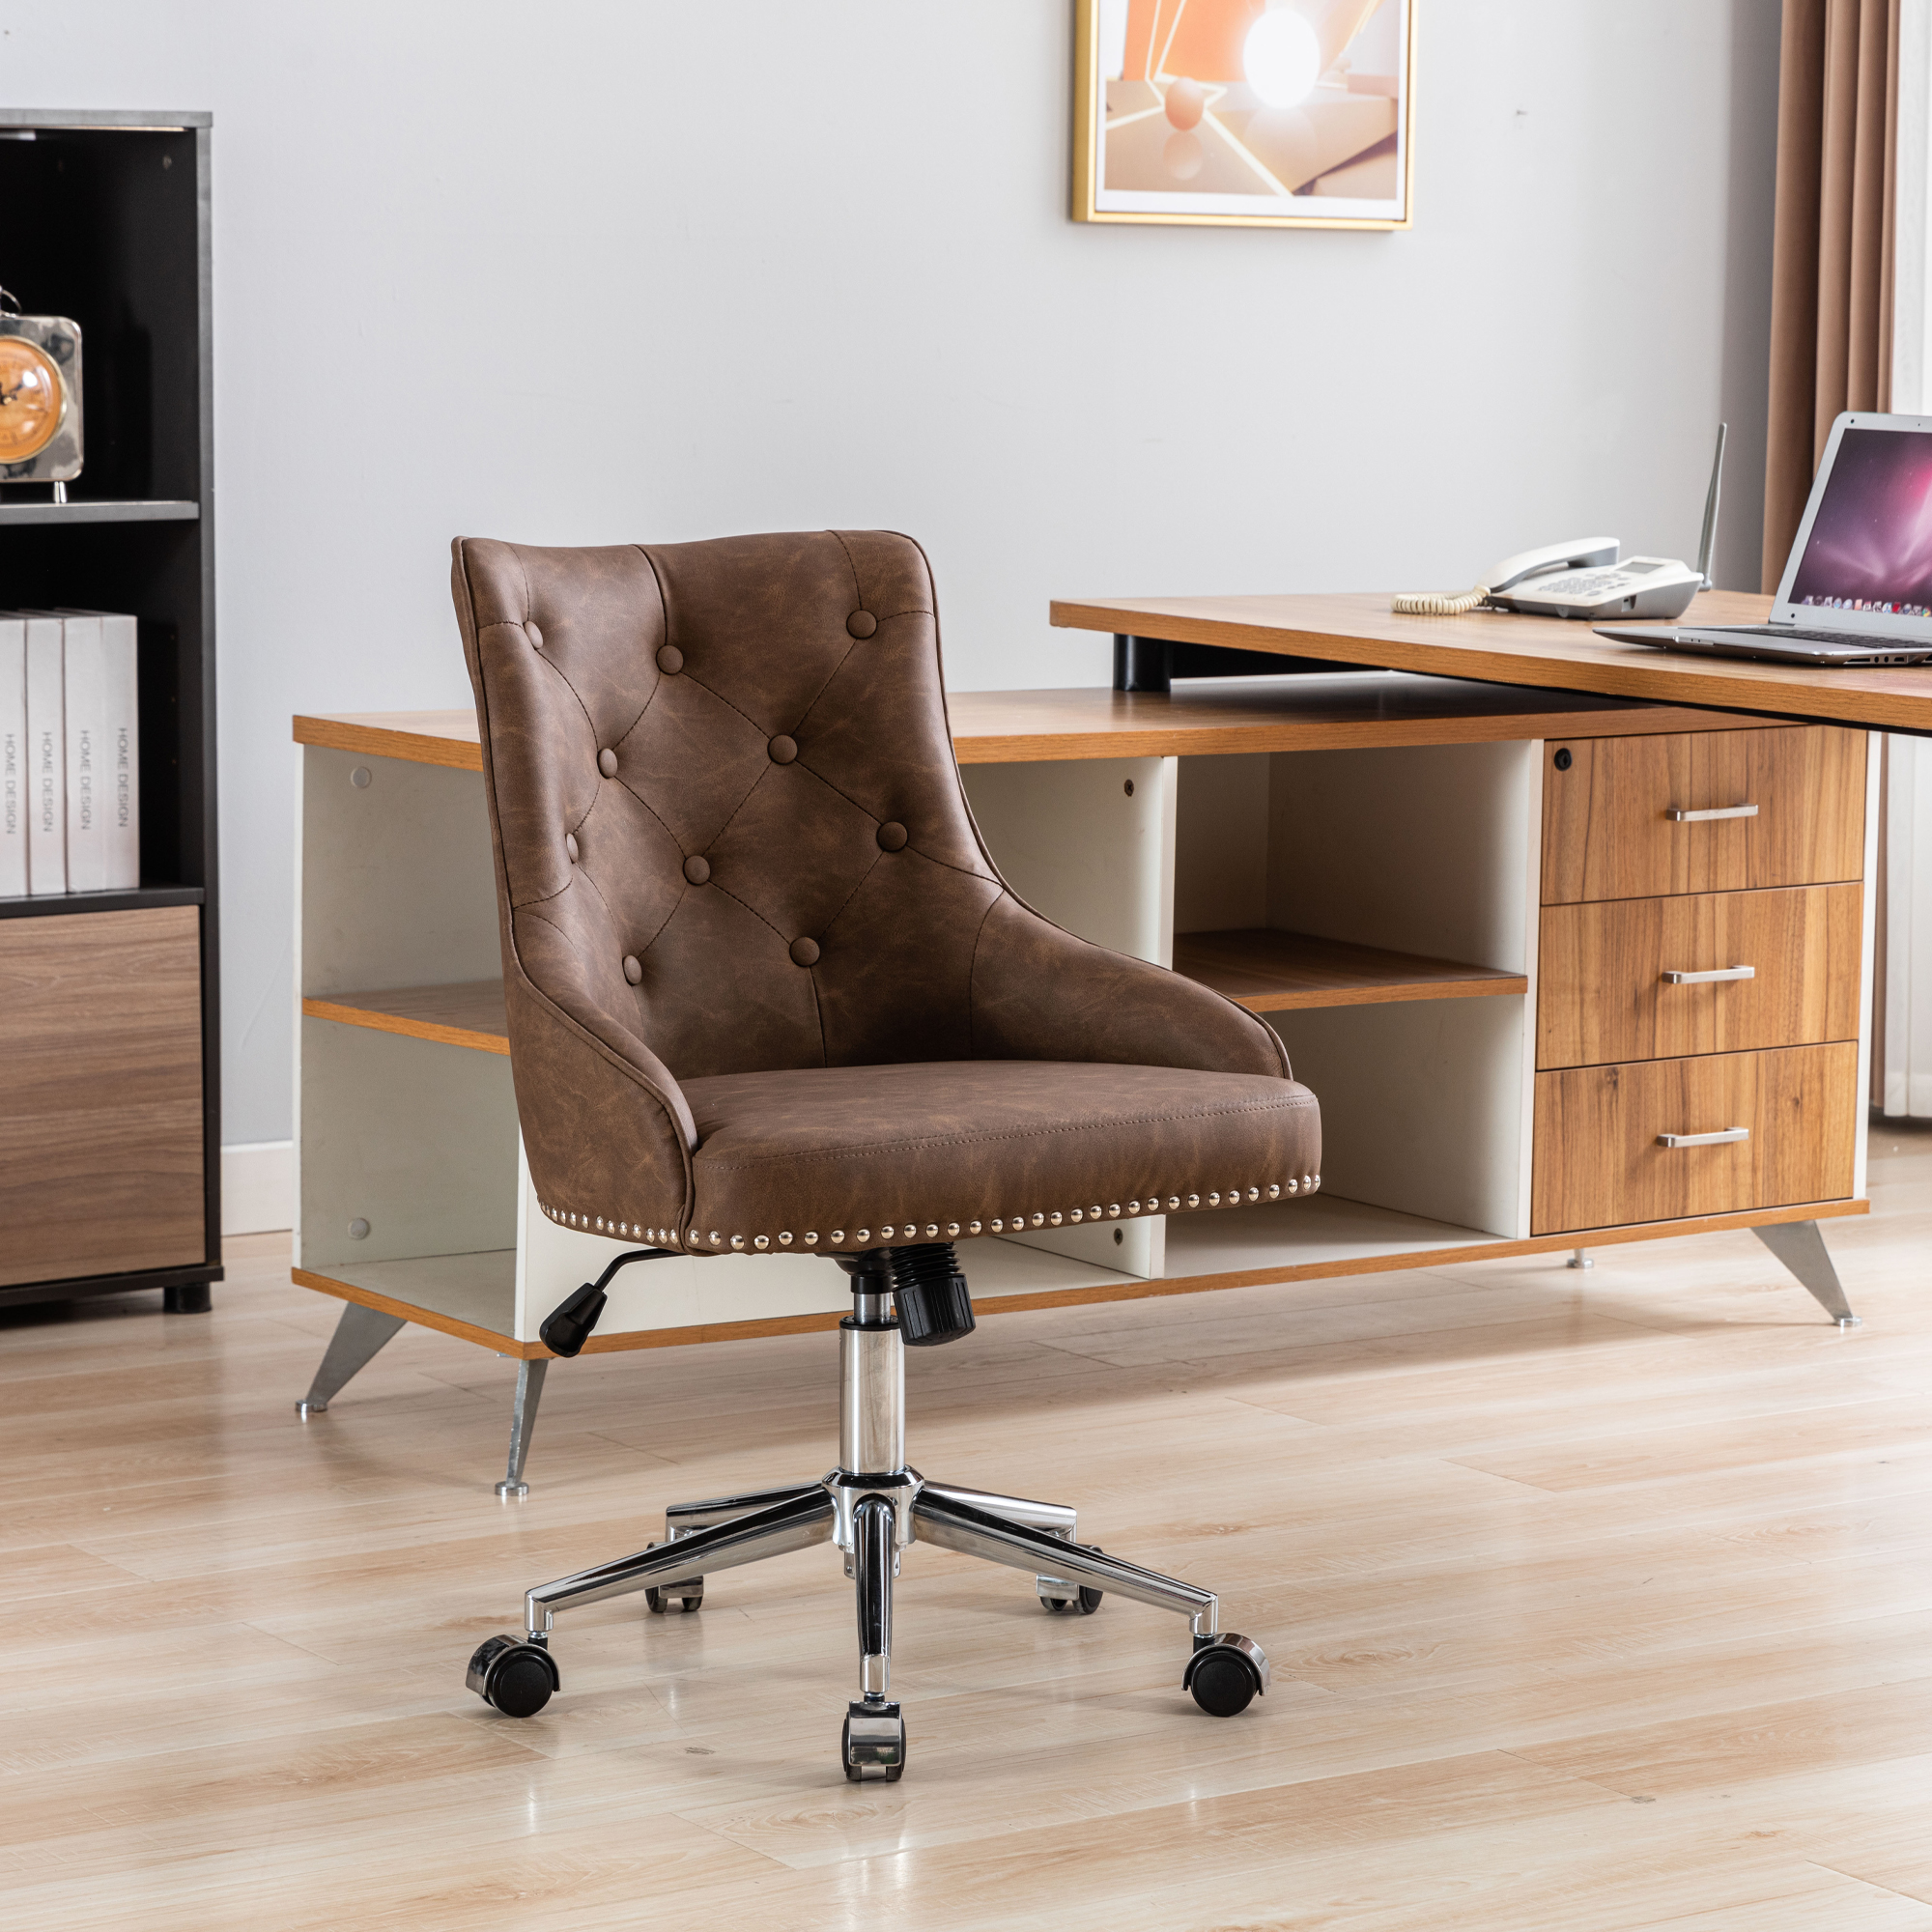 Hengming Office Desk Chair with Mid-Back Modern Tufted PU Leather Computer Chair Swivel Height Adjustable Accent Chair with Wheels and Metal Base with Arms for Study Living Bedroom